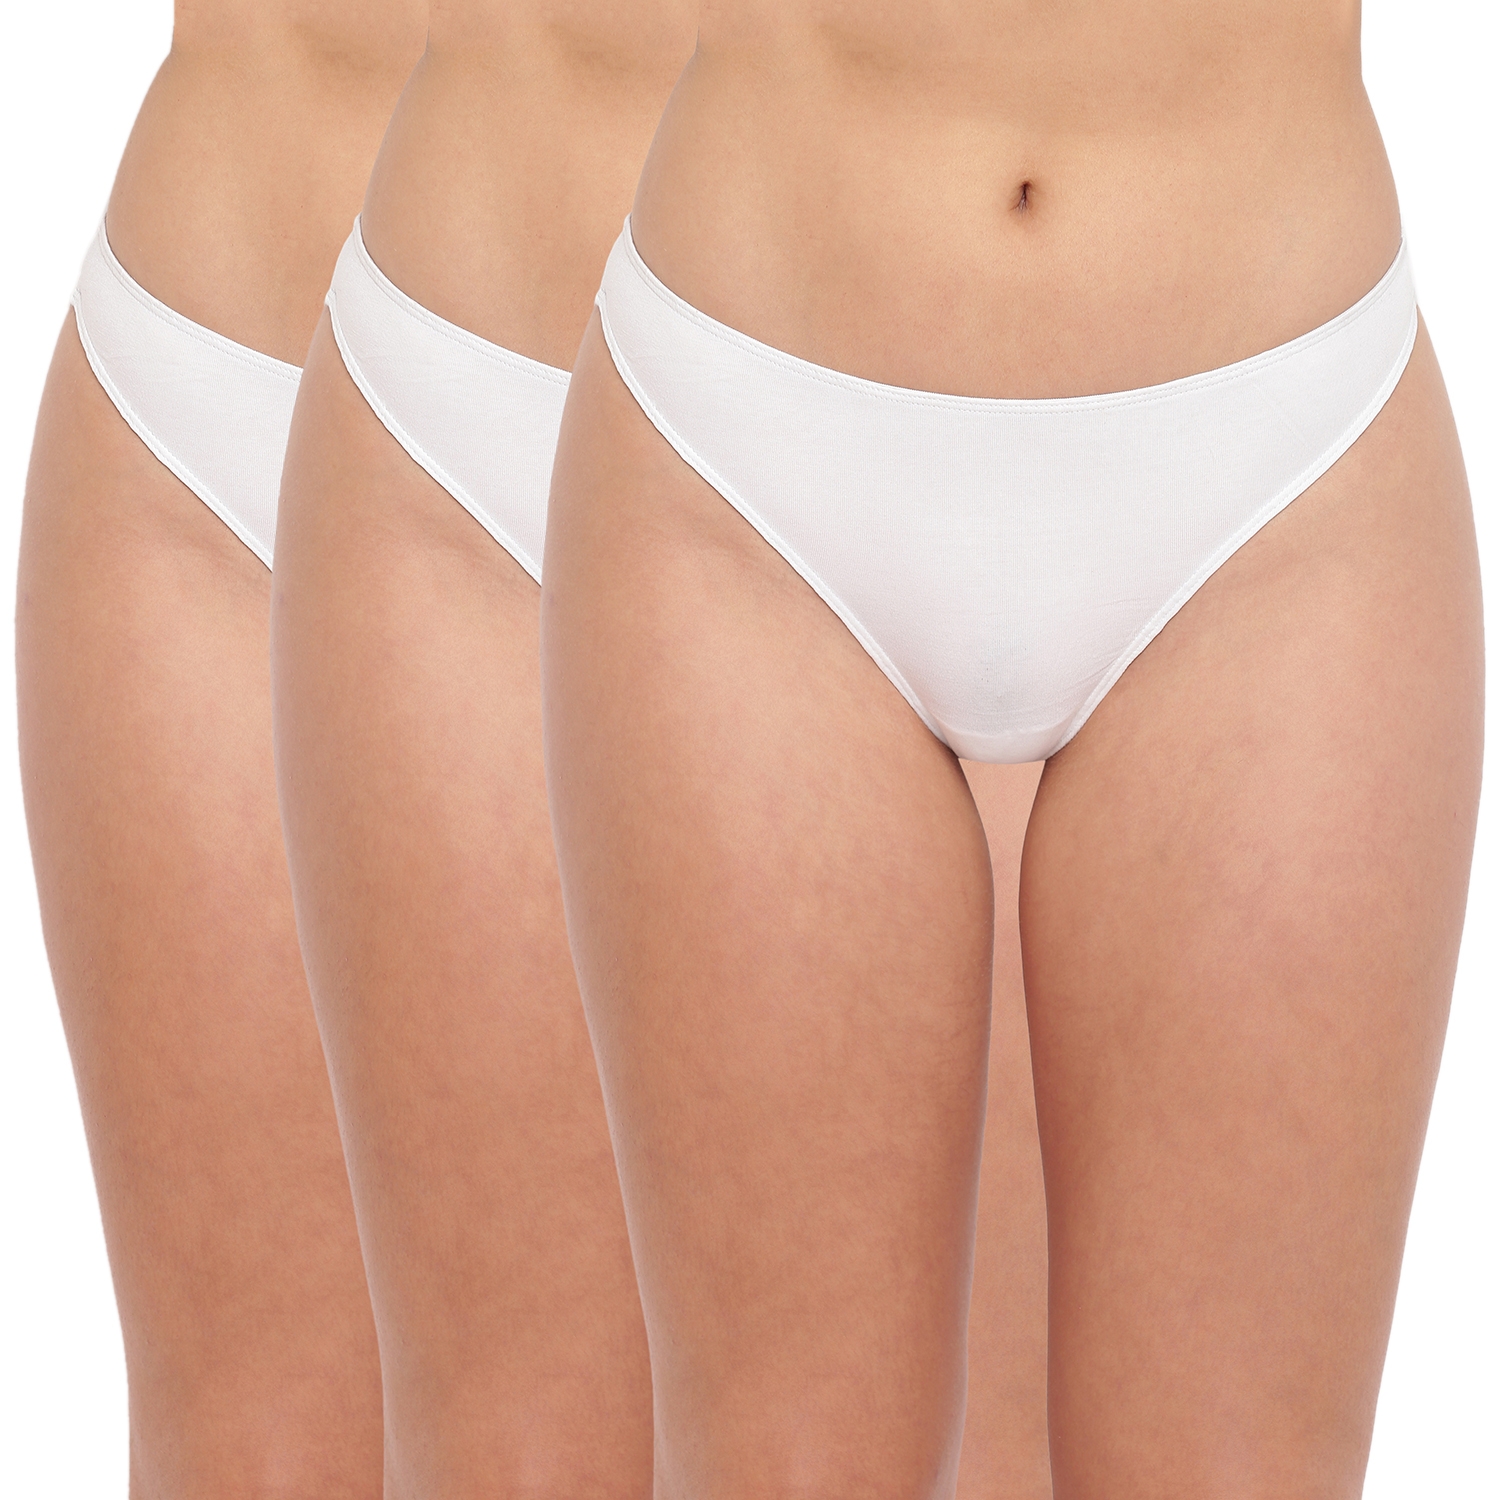 BASIICS by La Intimo | Black and White Spank Me Naughty Thong Pack of 3